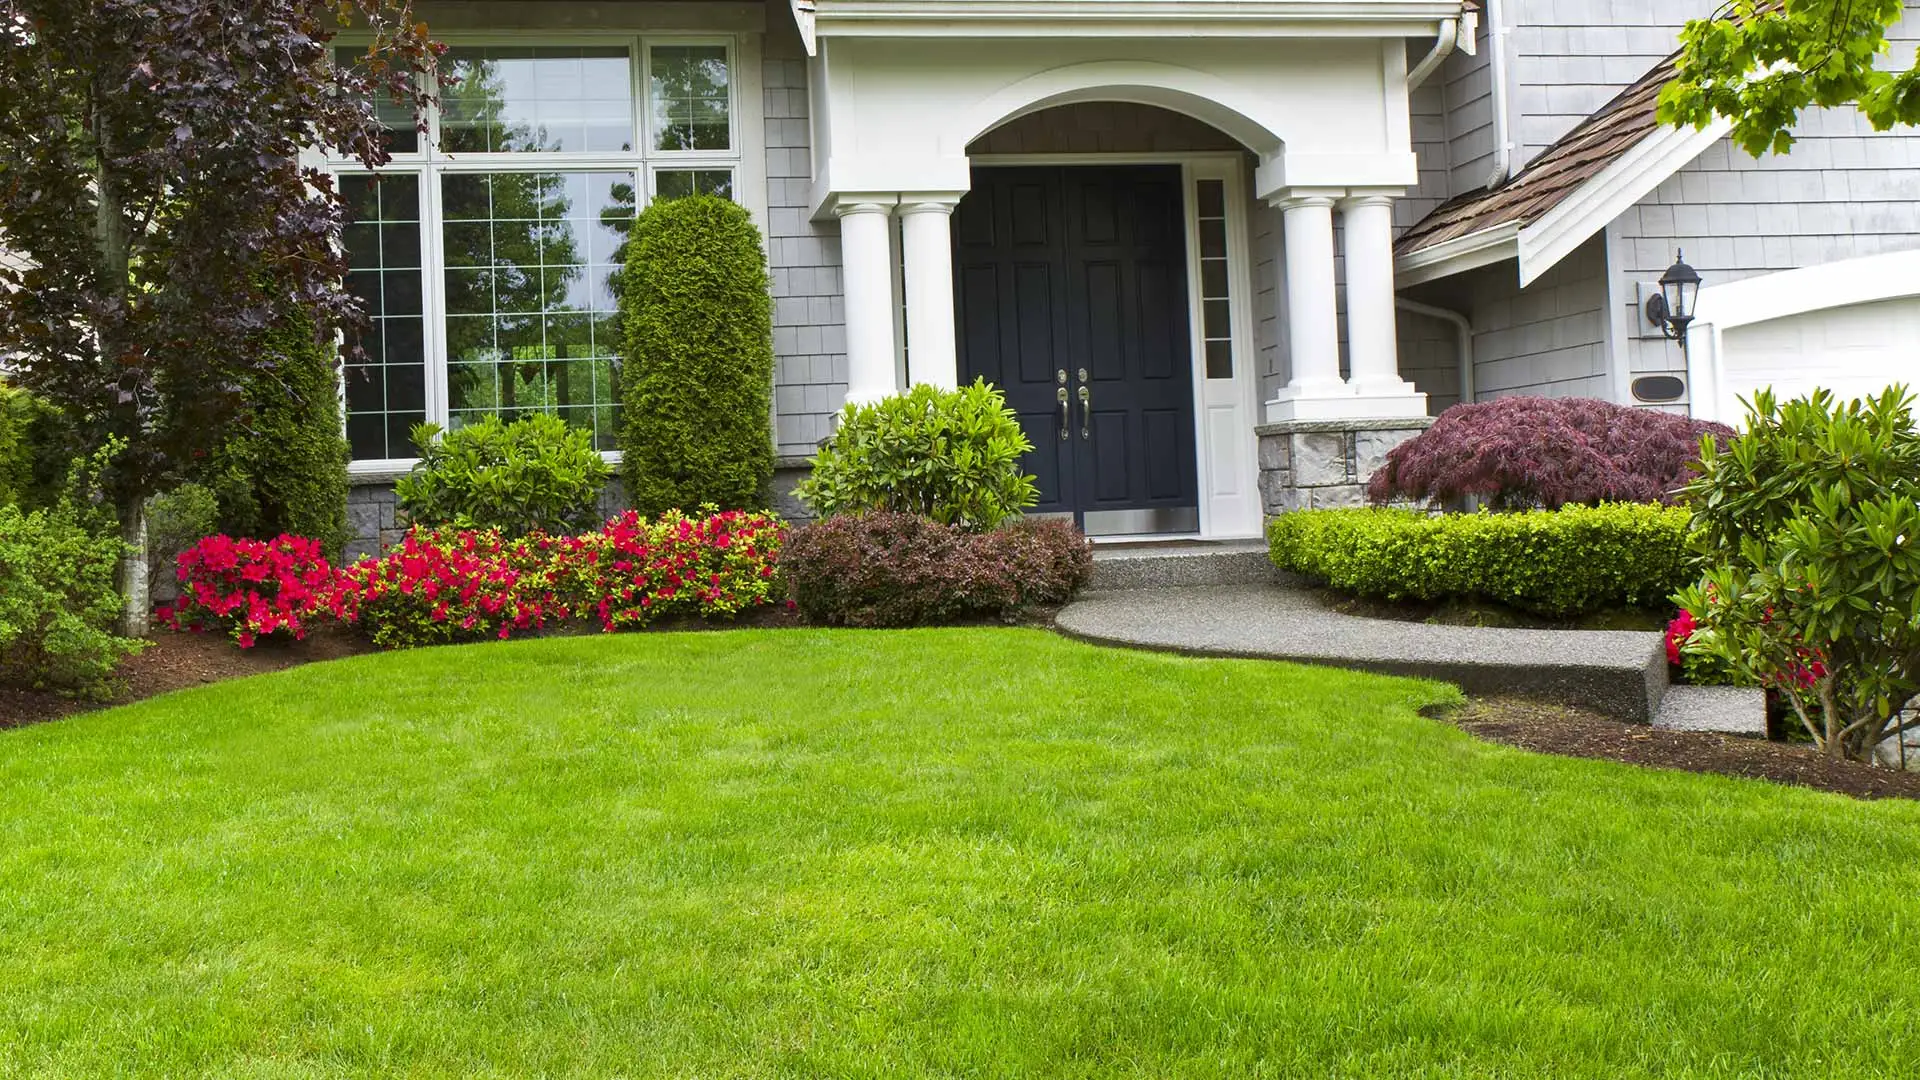 Healthy home lawn and landscape bed in East Grand Rapids, MI.